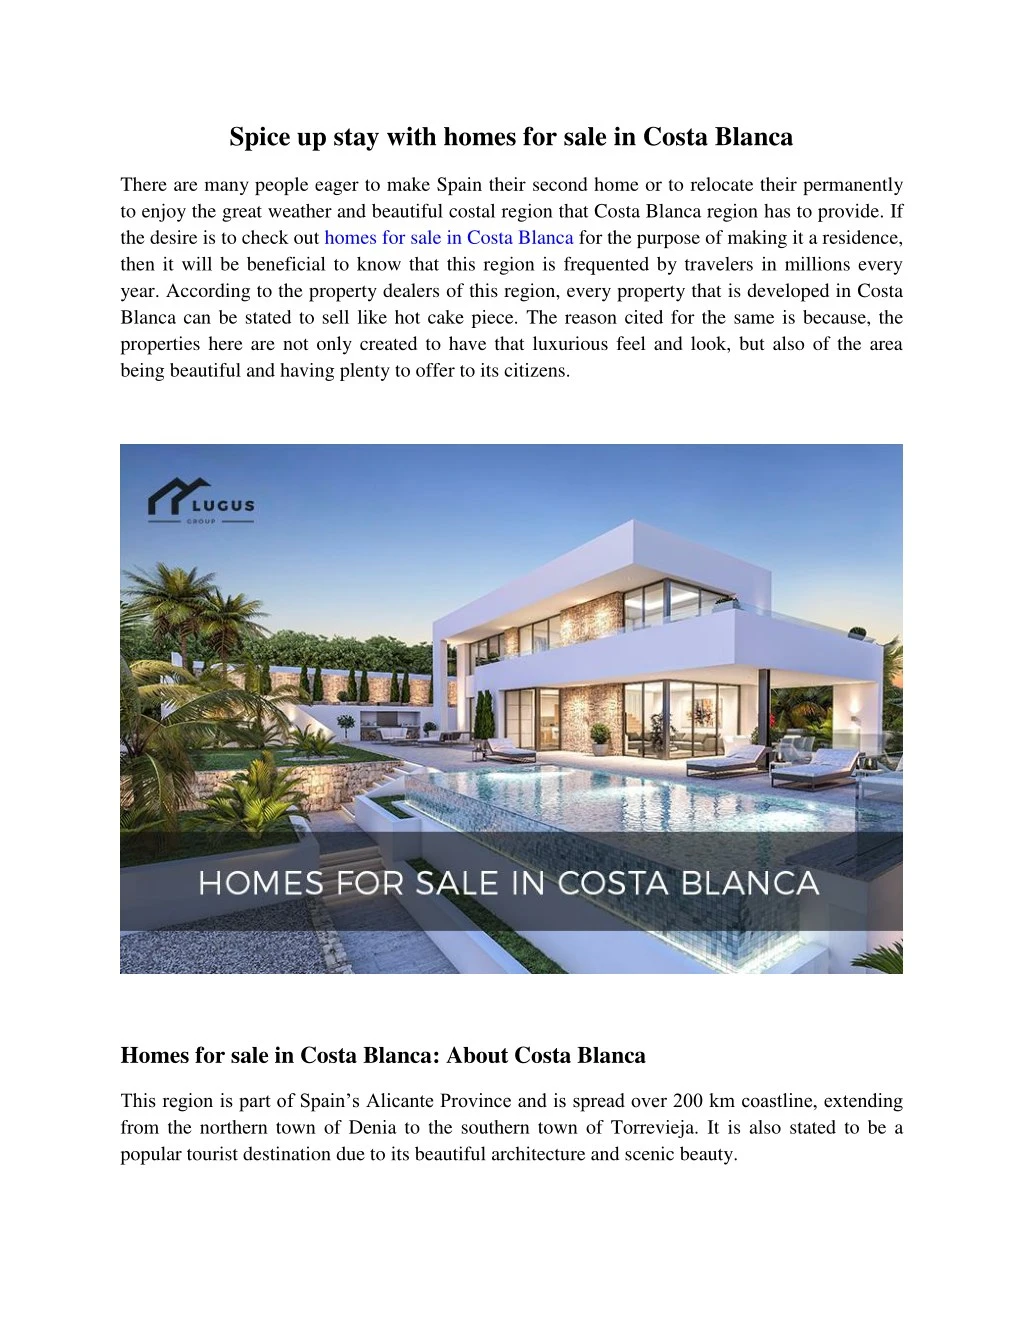 spice up stay with homes for sale in costa blanca